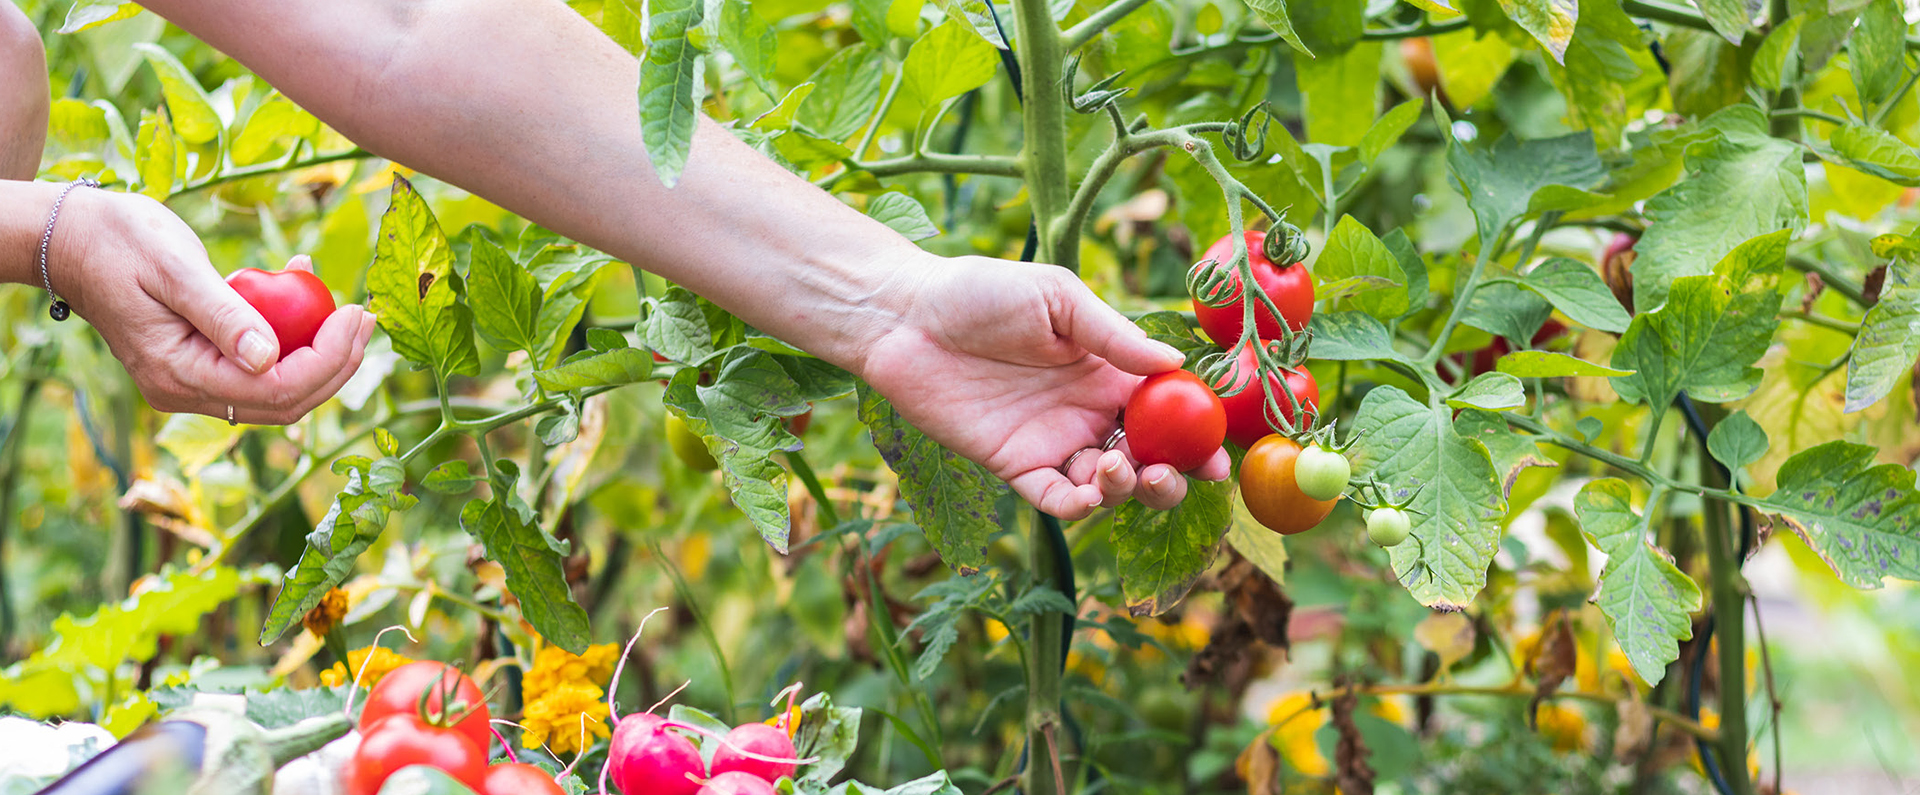 Tomatoes being picked off a vine 